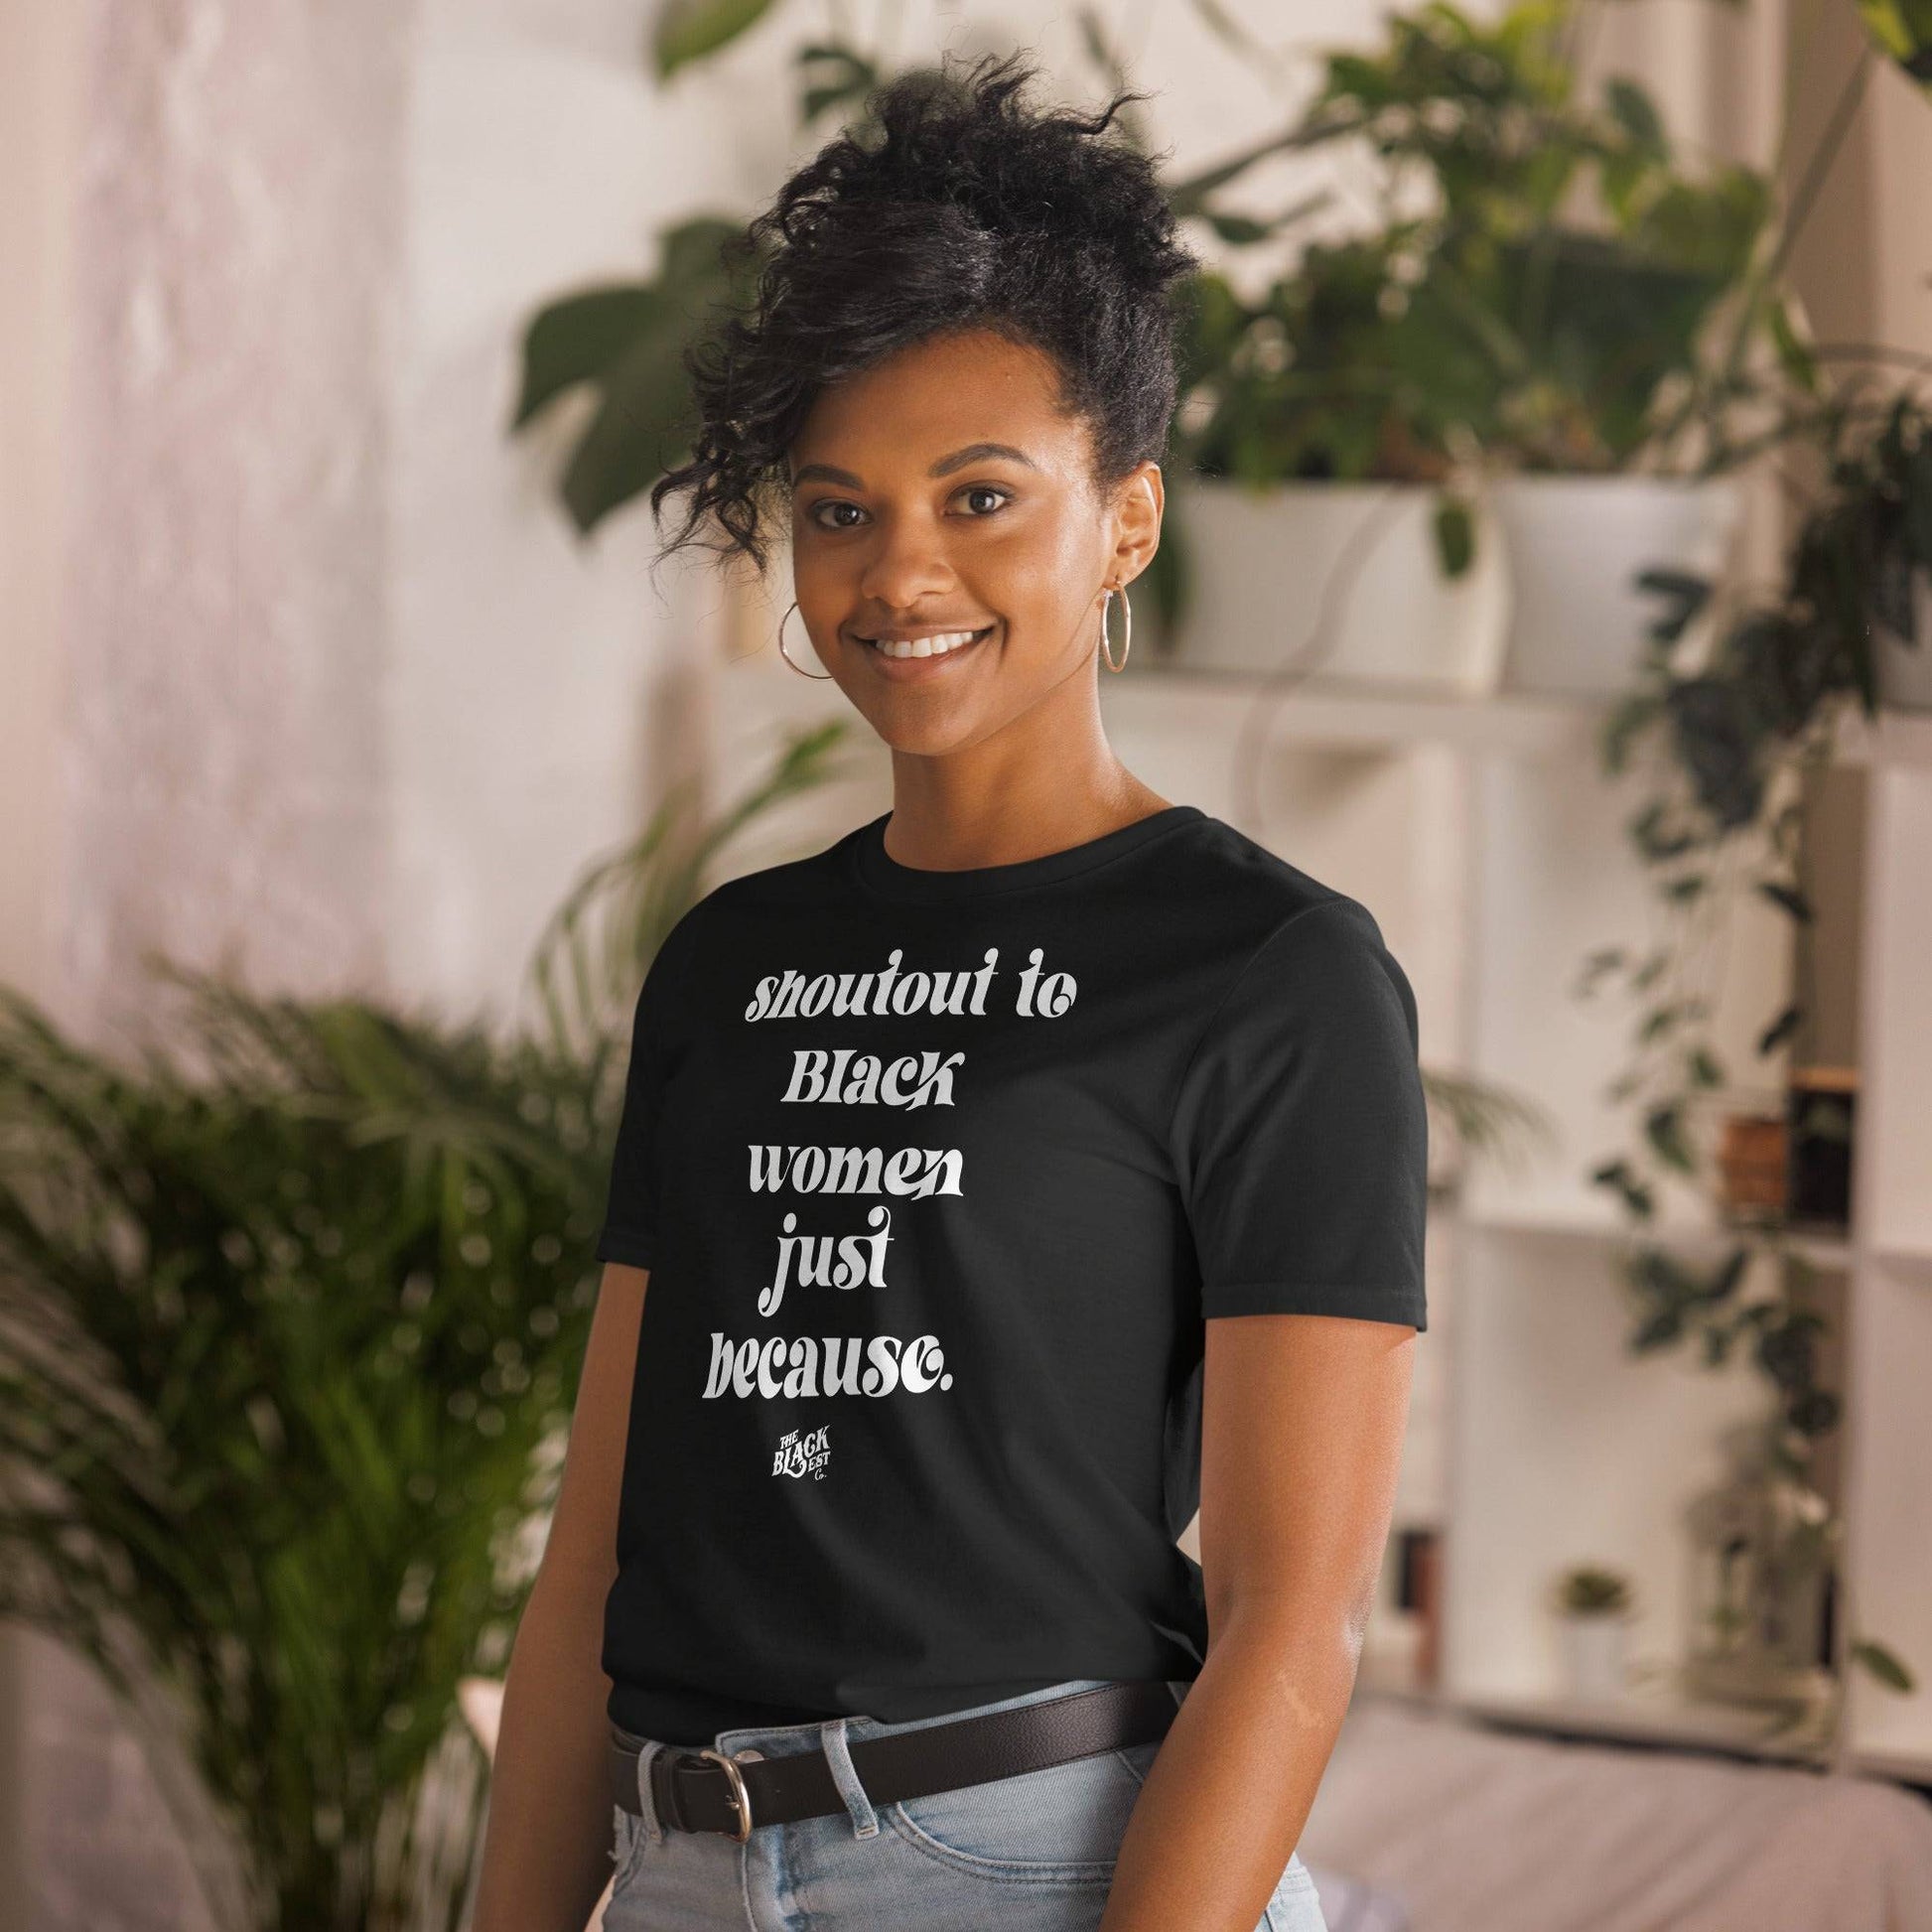 a woman wearing a black t - shirt that says without to black women just because